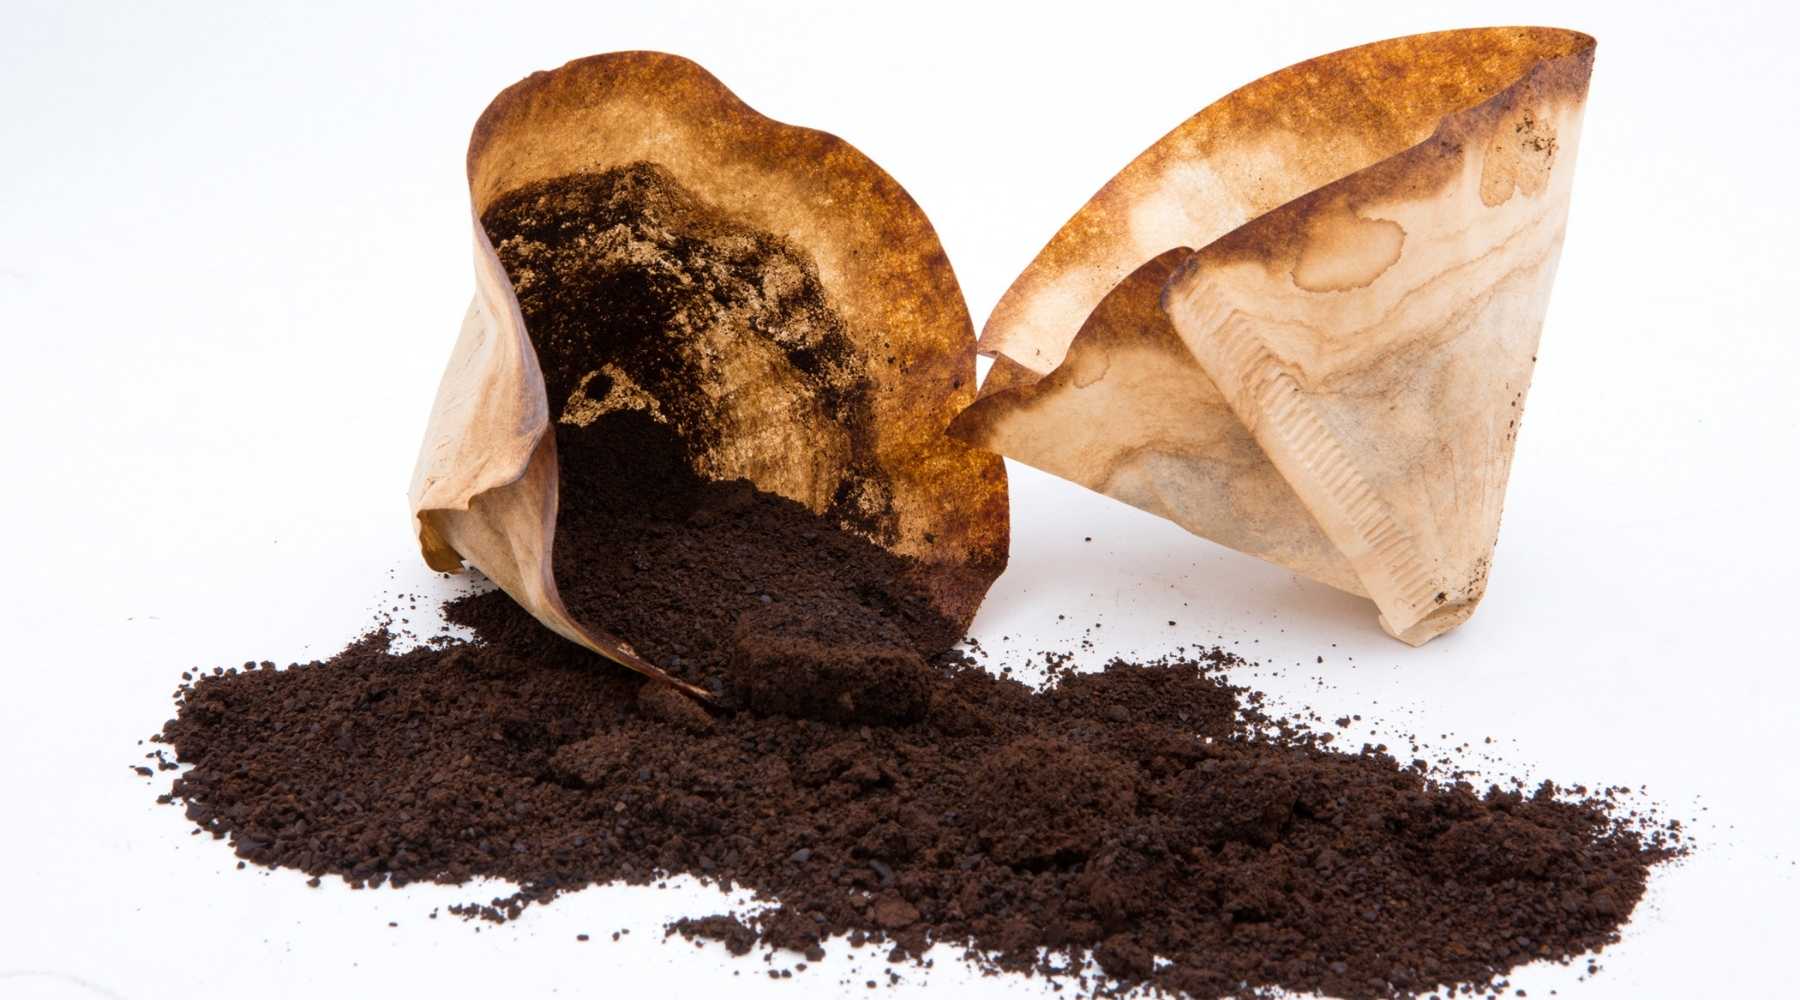 Cleaning Coffee Grounds Uses